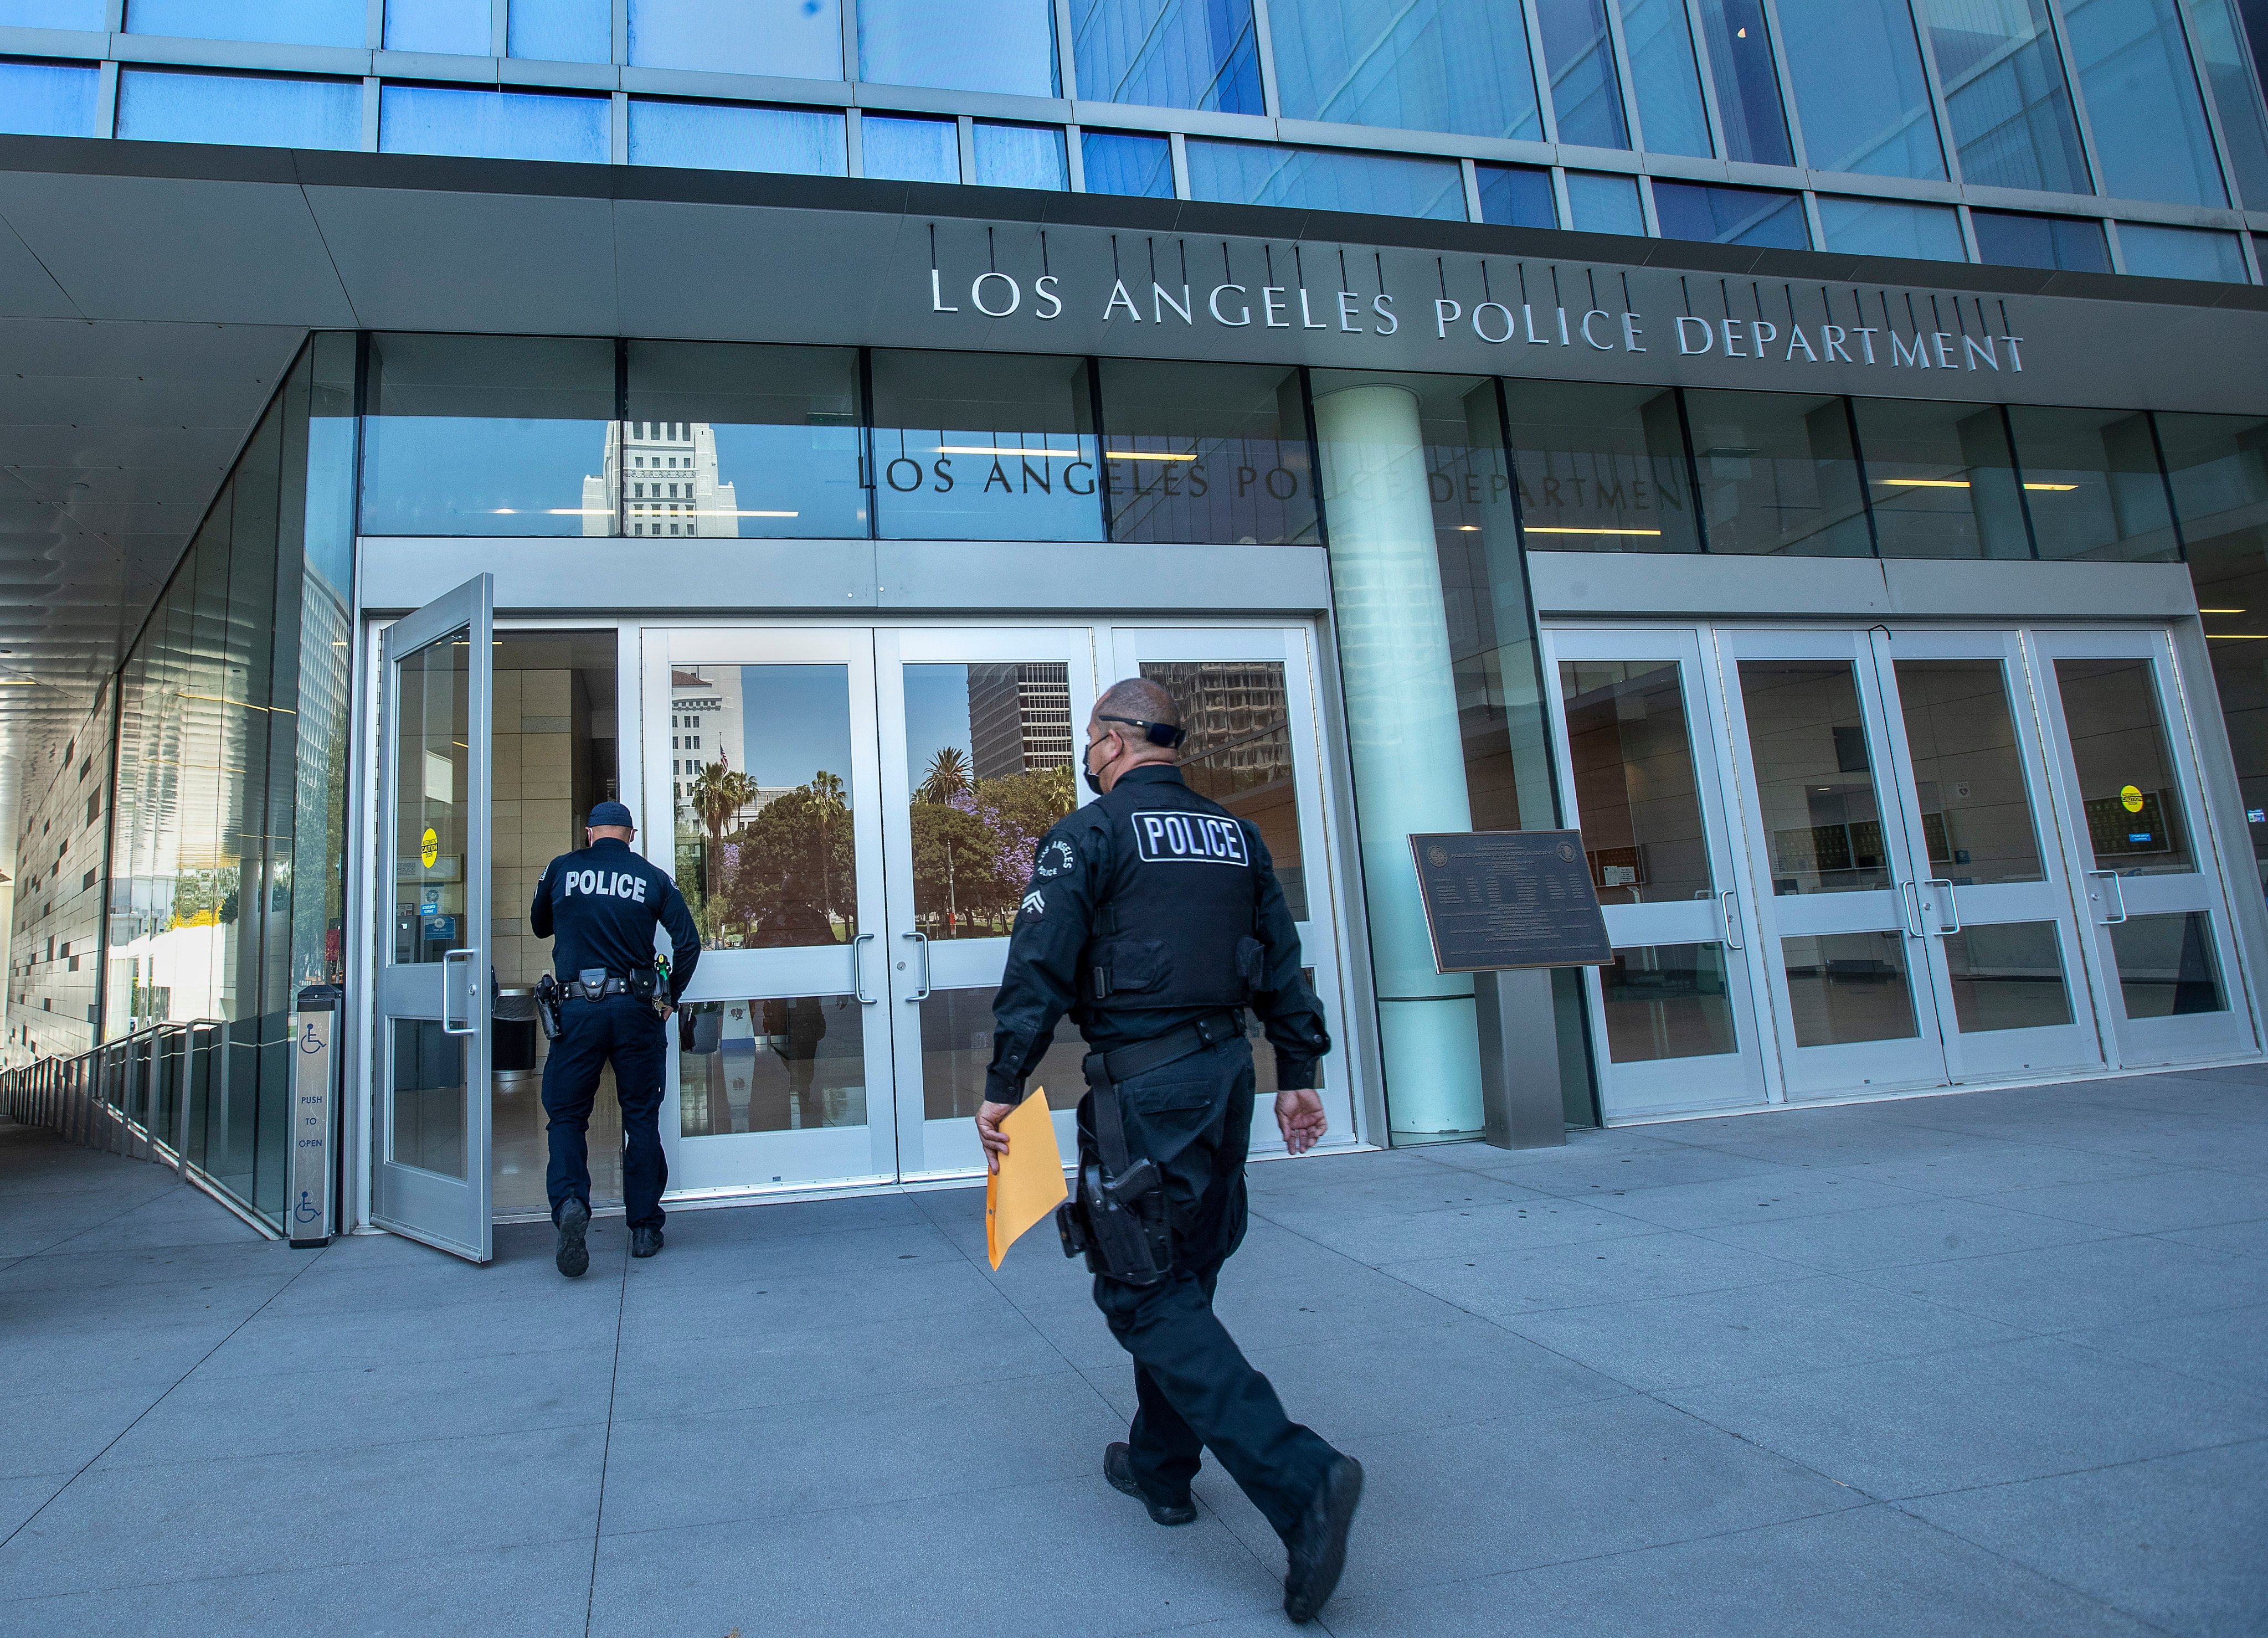 Los Angeles Police Department headquarters. File photo: TNS